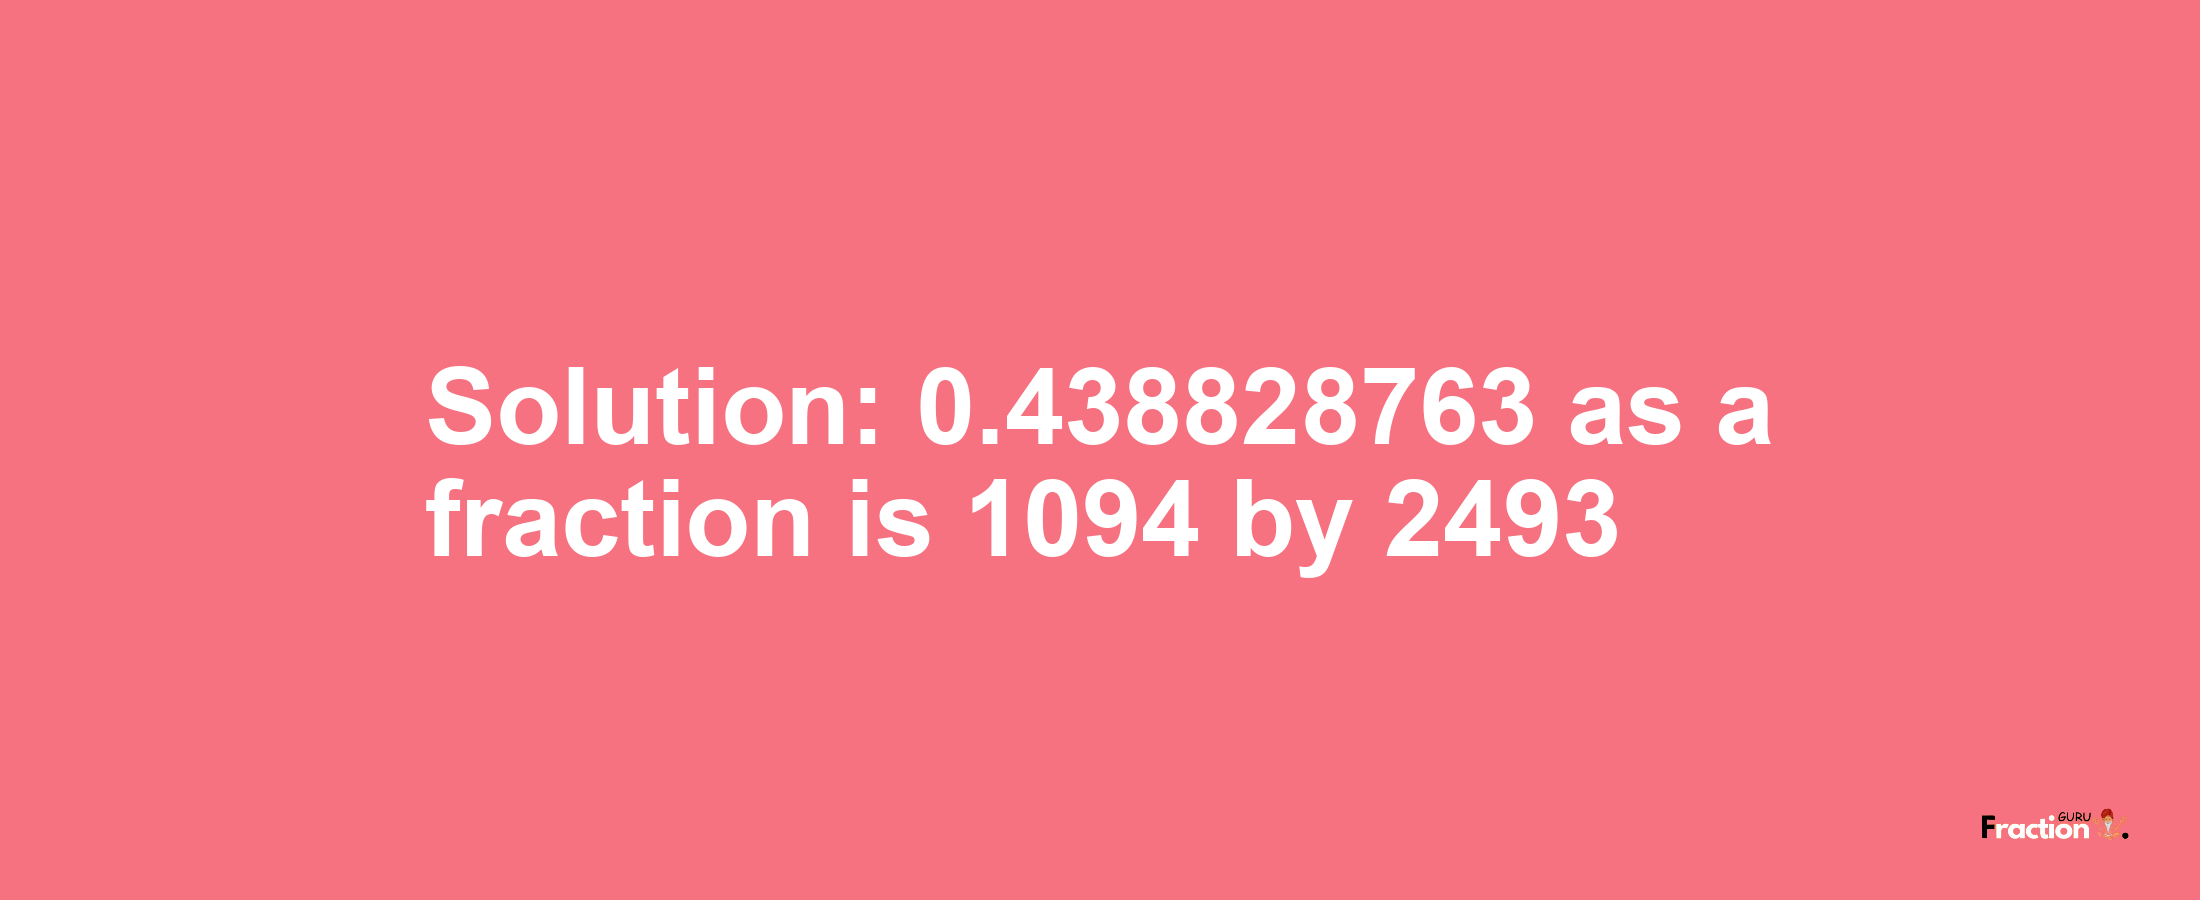 Solution:0.438828763 as a fraction is 1094/2493